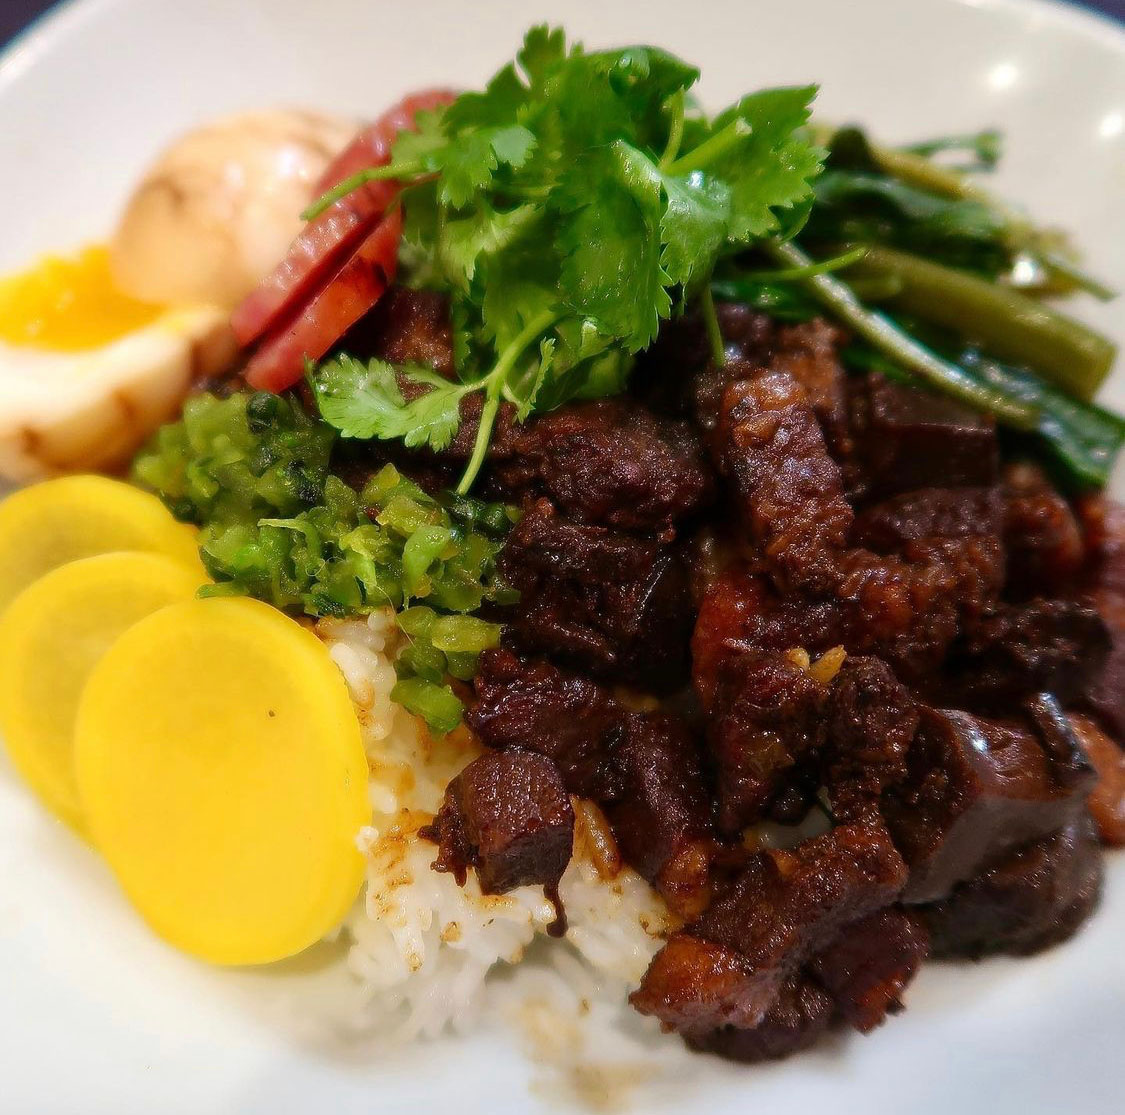 A bowl of lu rou fan, or braised pork rice, garnished with cilantro and yellow daikon pickles.